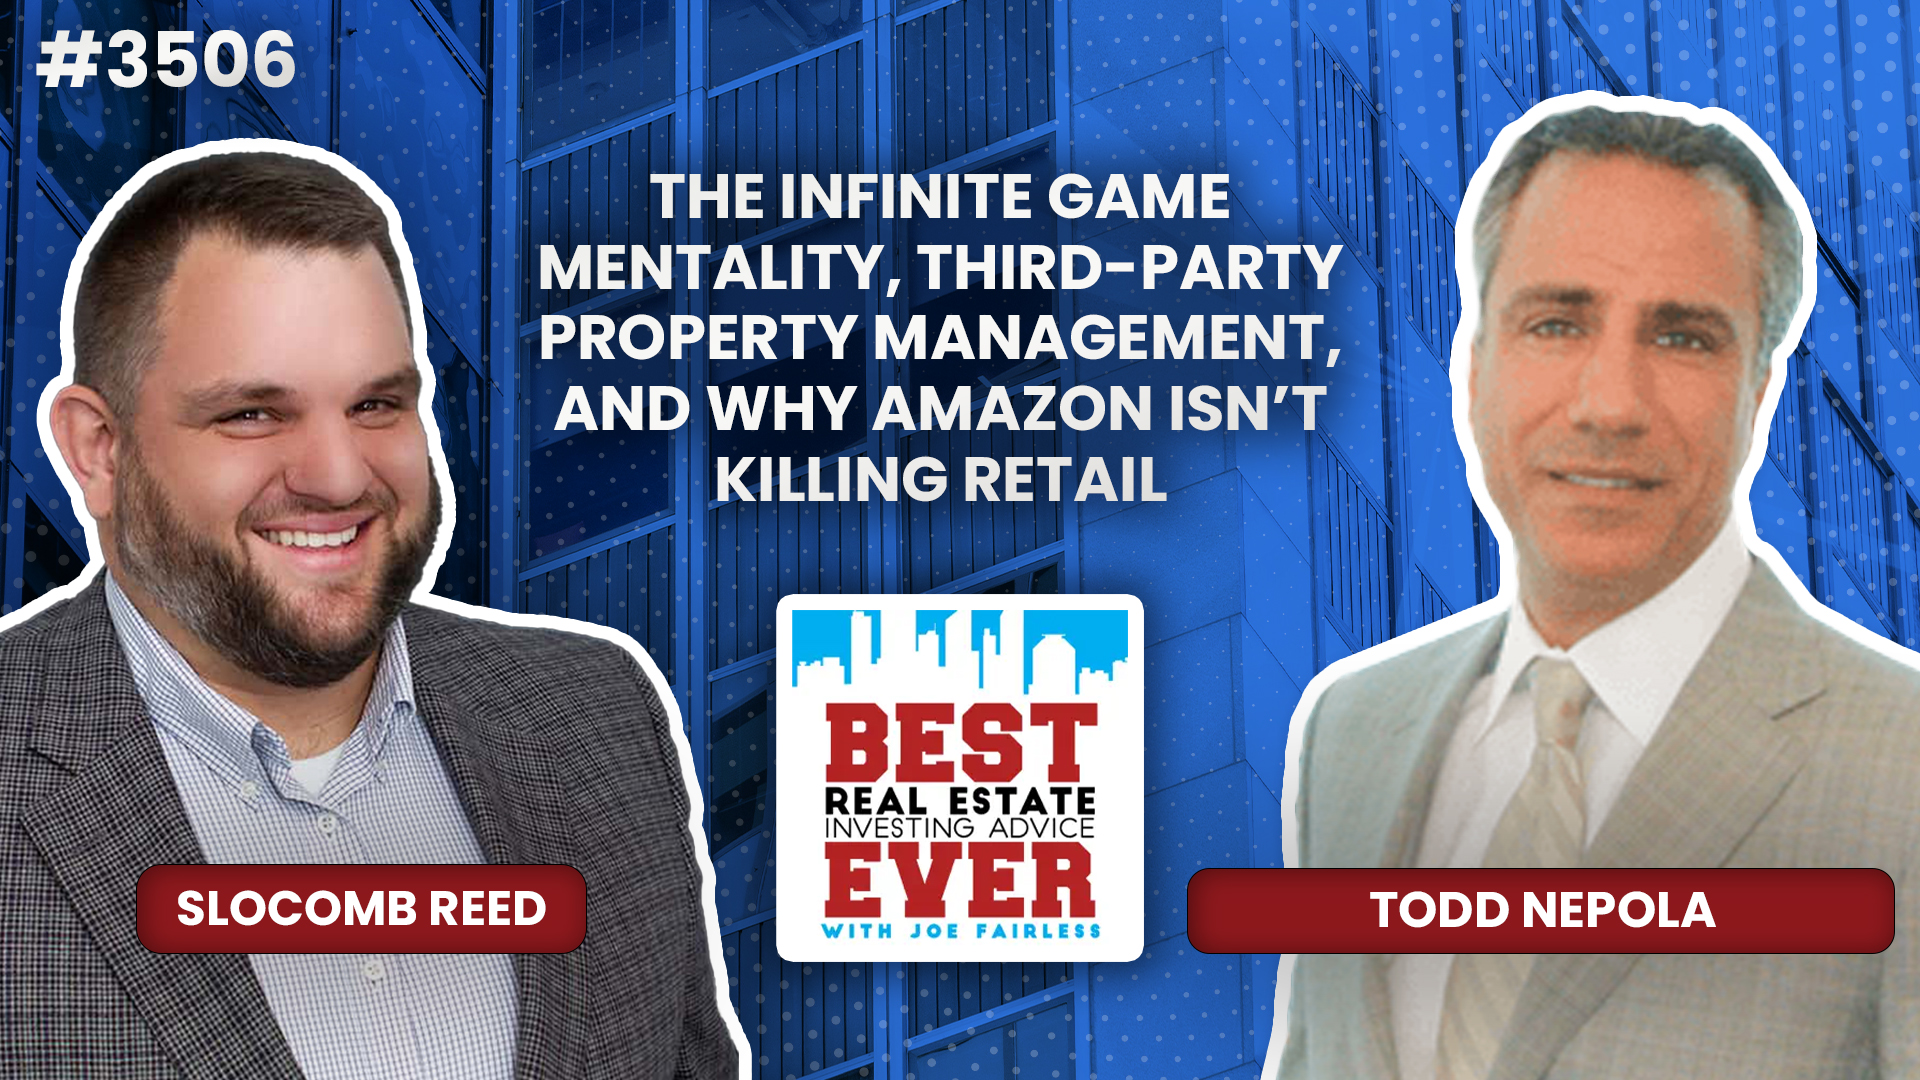 JF3506: The Infinite Game Mentality, Third-Party Property Management, and Why Amazon Isn’t Killing Retail ft. Todd Nepola